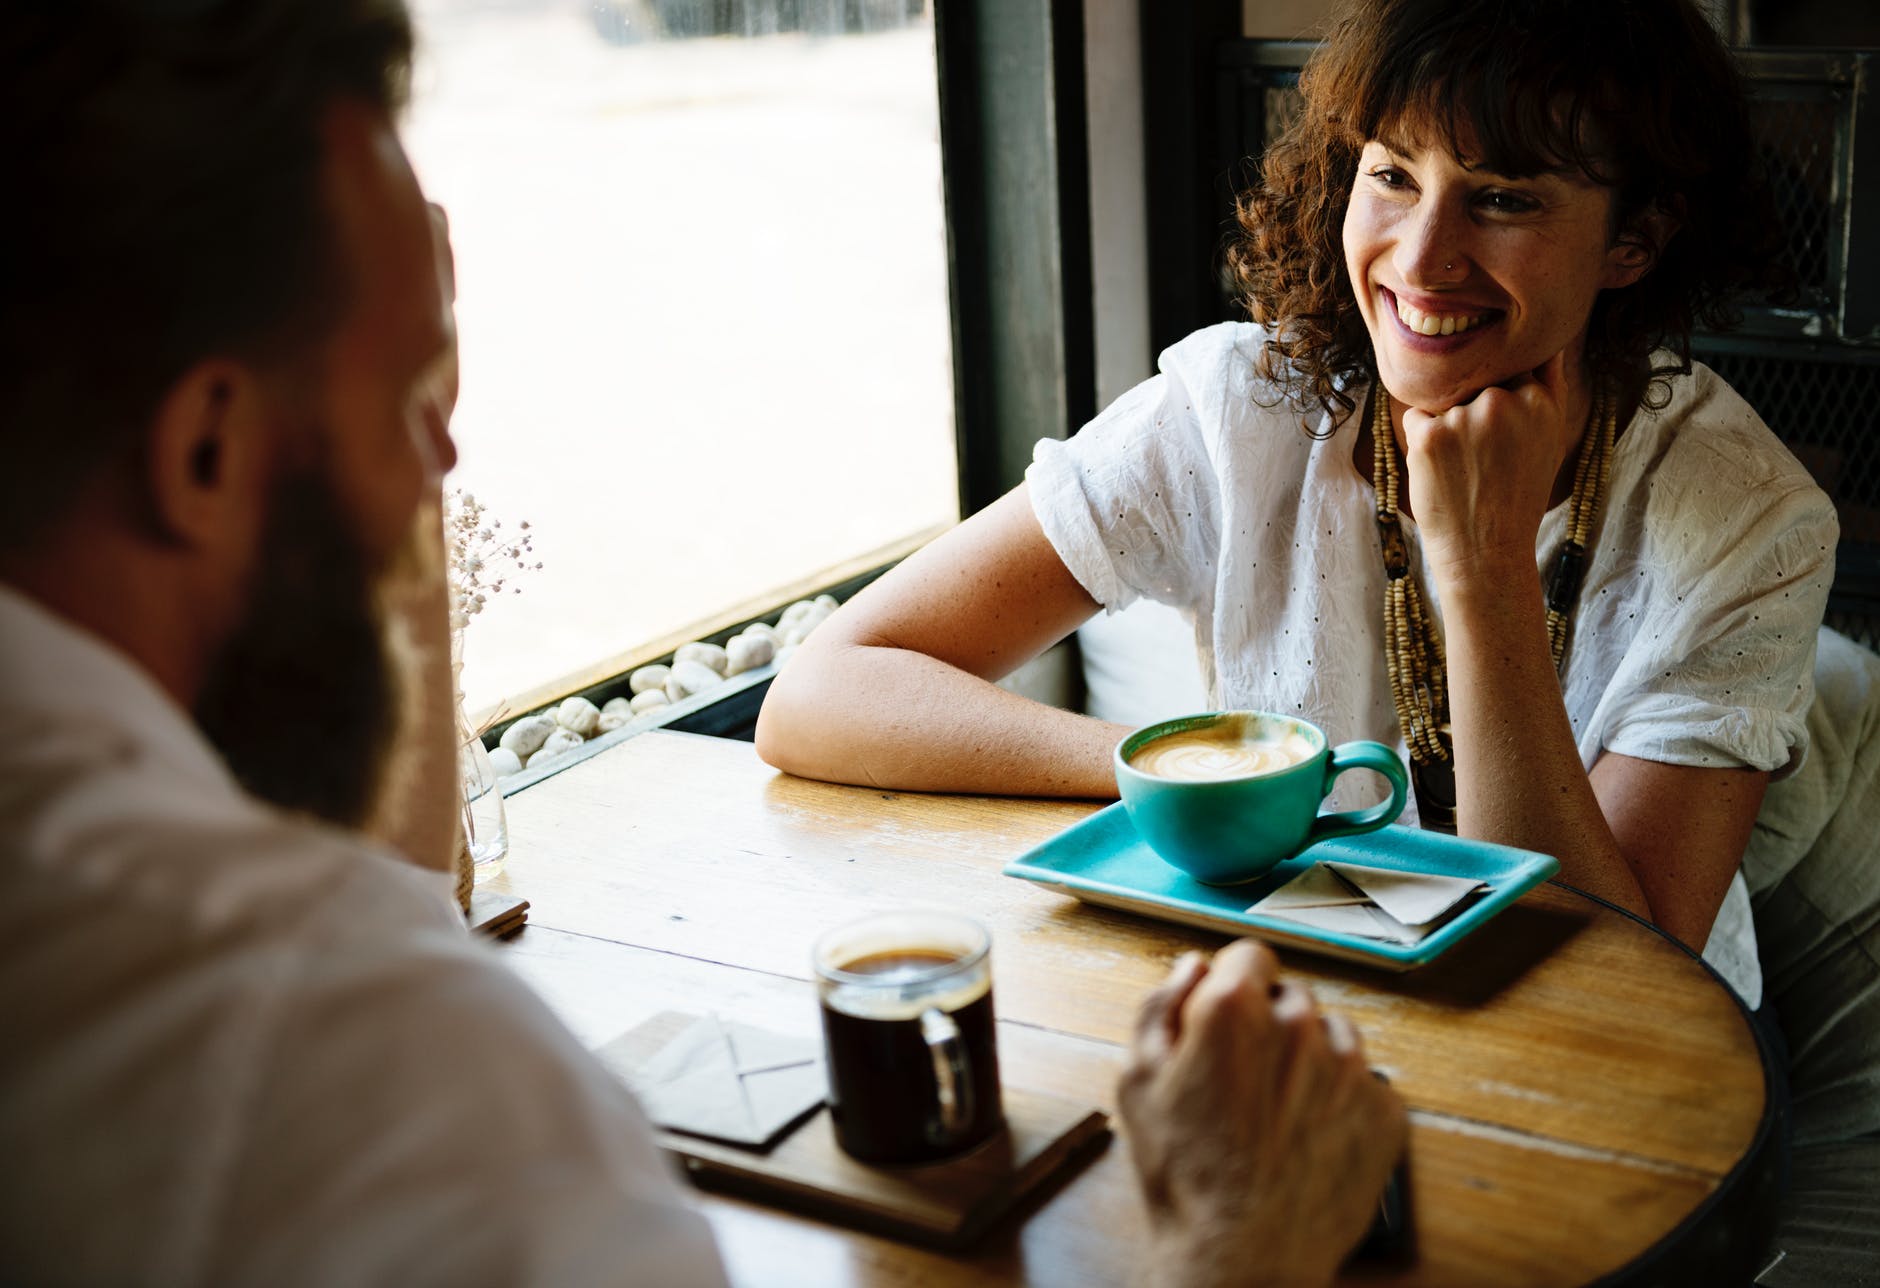 A man and a girl having a chat over coffee. | Source: Pexels